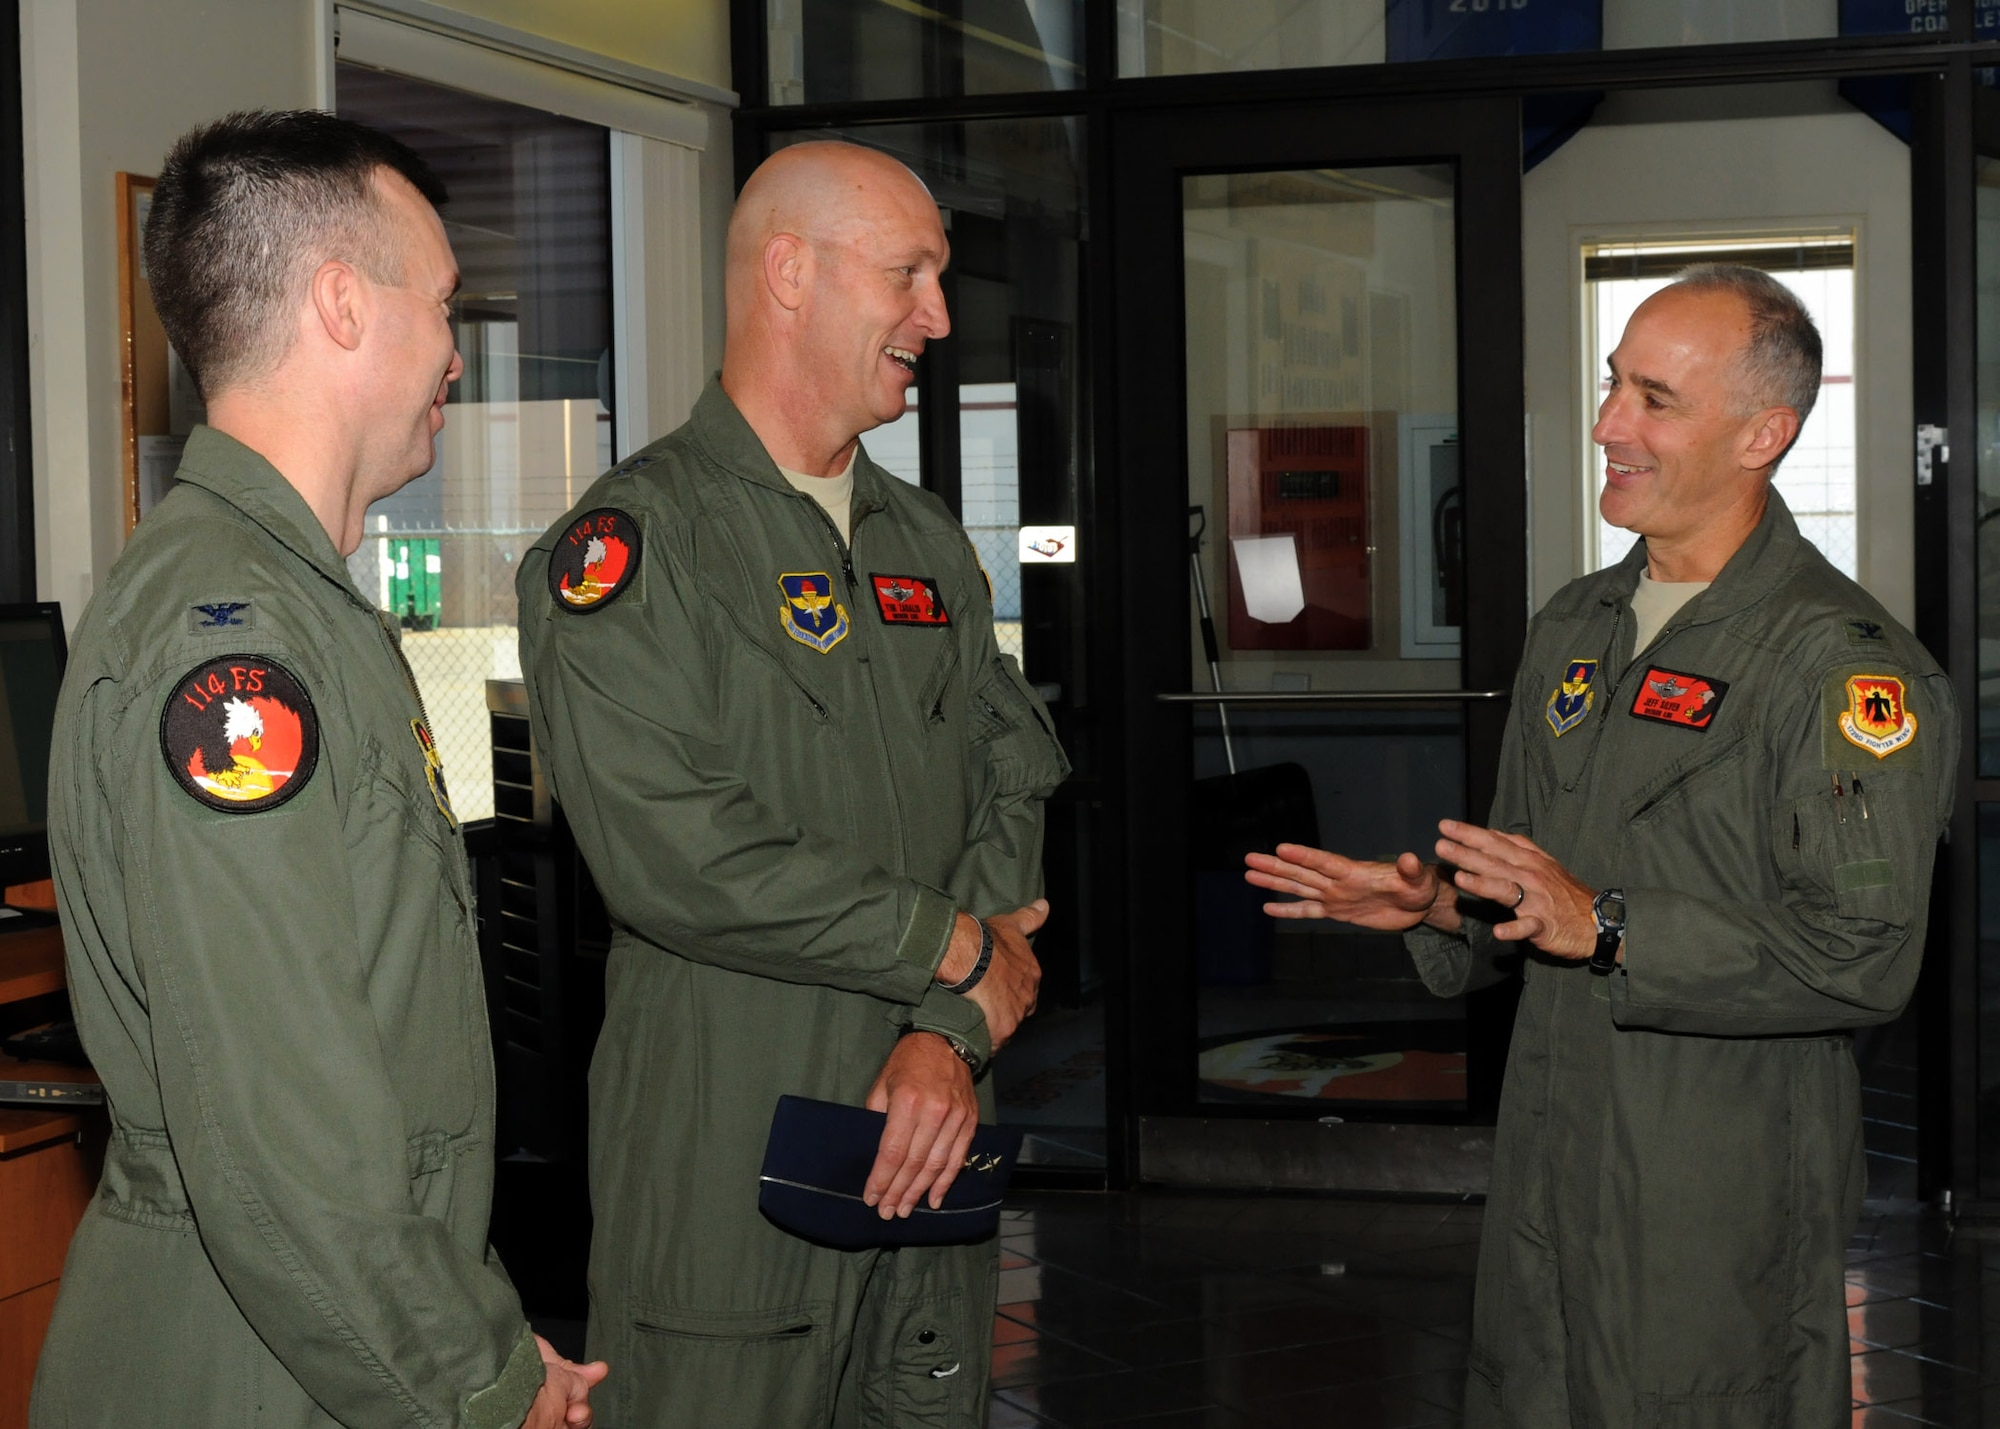 Maj. Gen. Timothy Zadalis, Director of Intelligence Operations and Nuclear Integration Headquarters at Air Education and Training Command, visits members of the 173rd Fighter Wing and 114th Fighter Squadron before beginning preparations for his incentive flight in an F-15 Eagle at Kingsley Field, Ore., July 24, 2012. Kingsley Field was just moved under the command of Zadalis earlier this year. (Air National Guard photo by Airman 1st Class Penny Hamilton/Released)